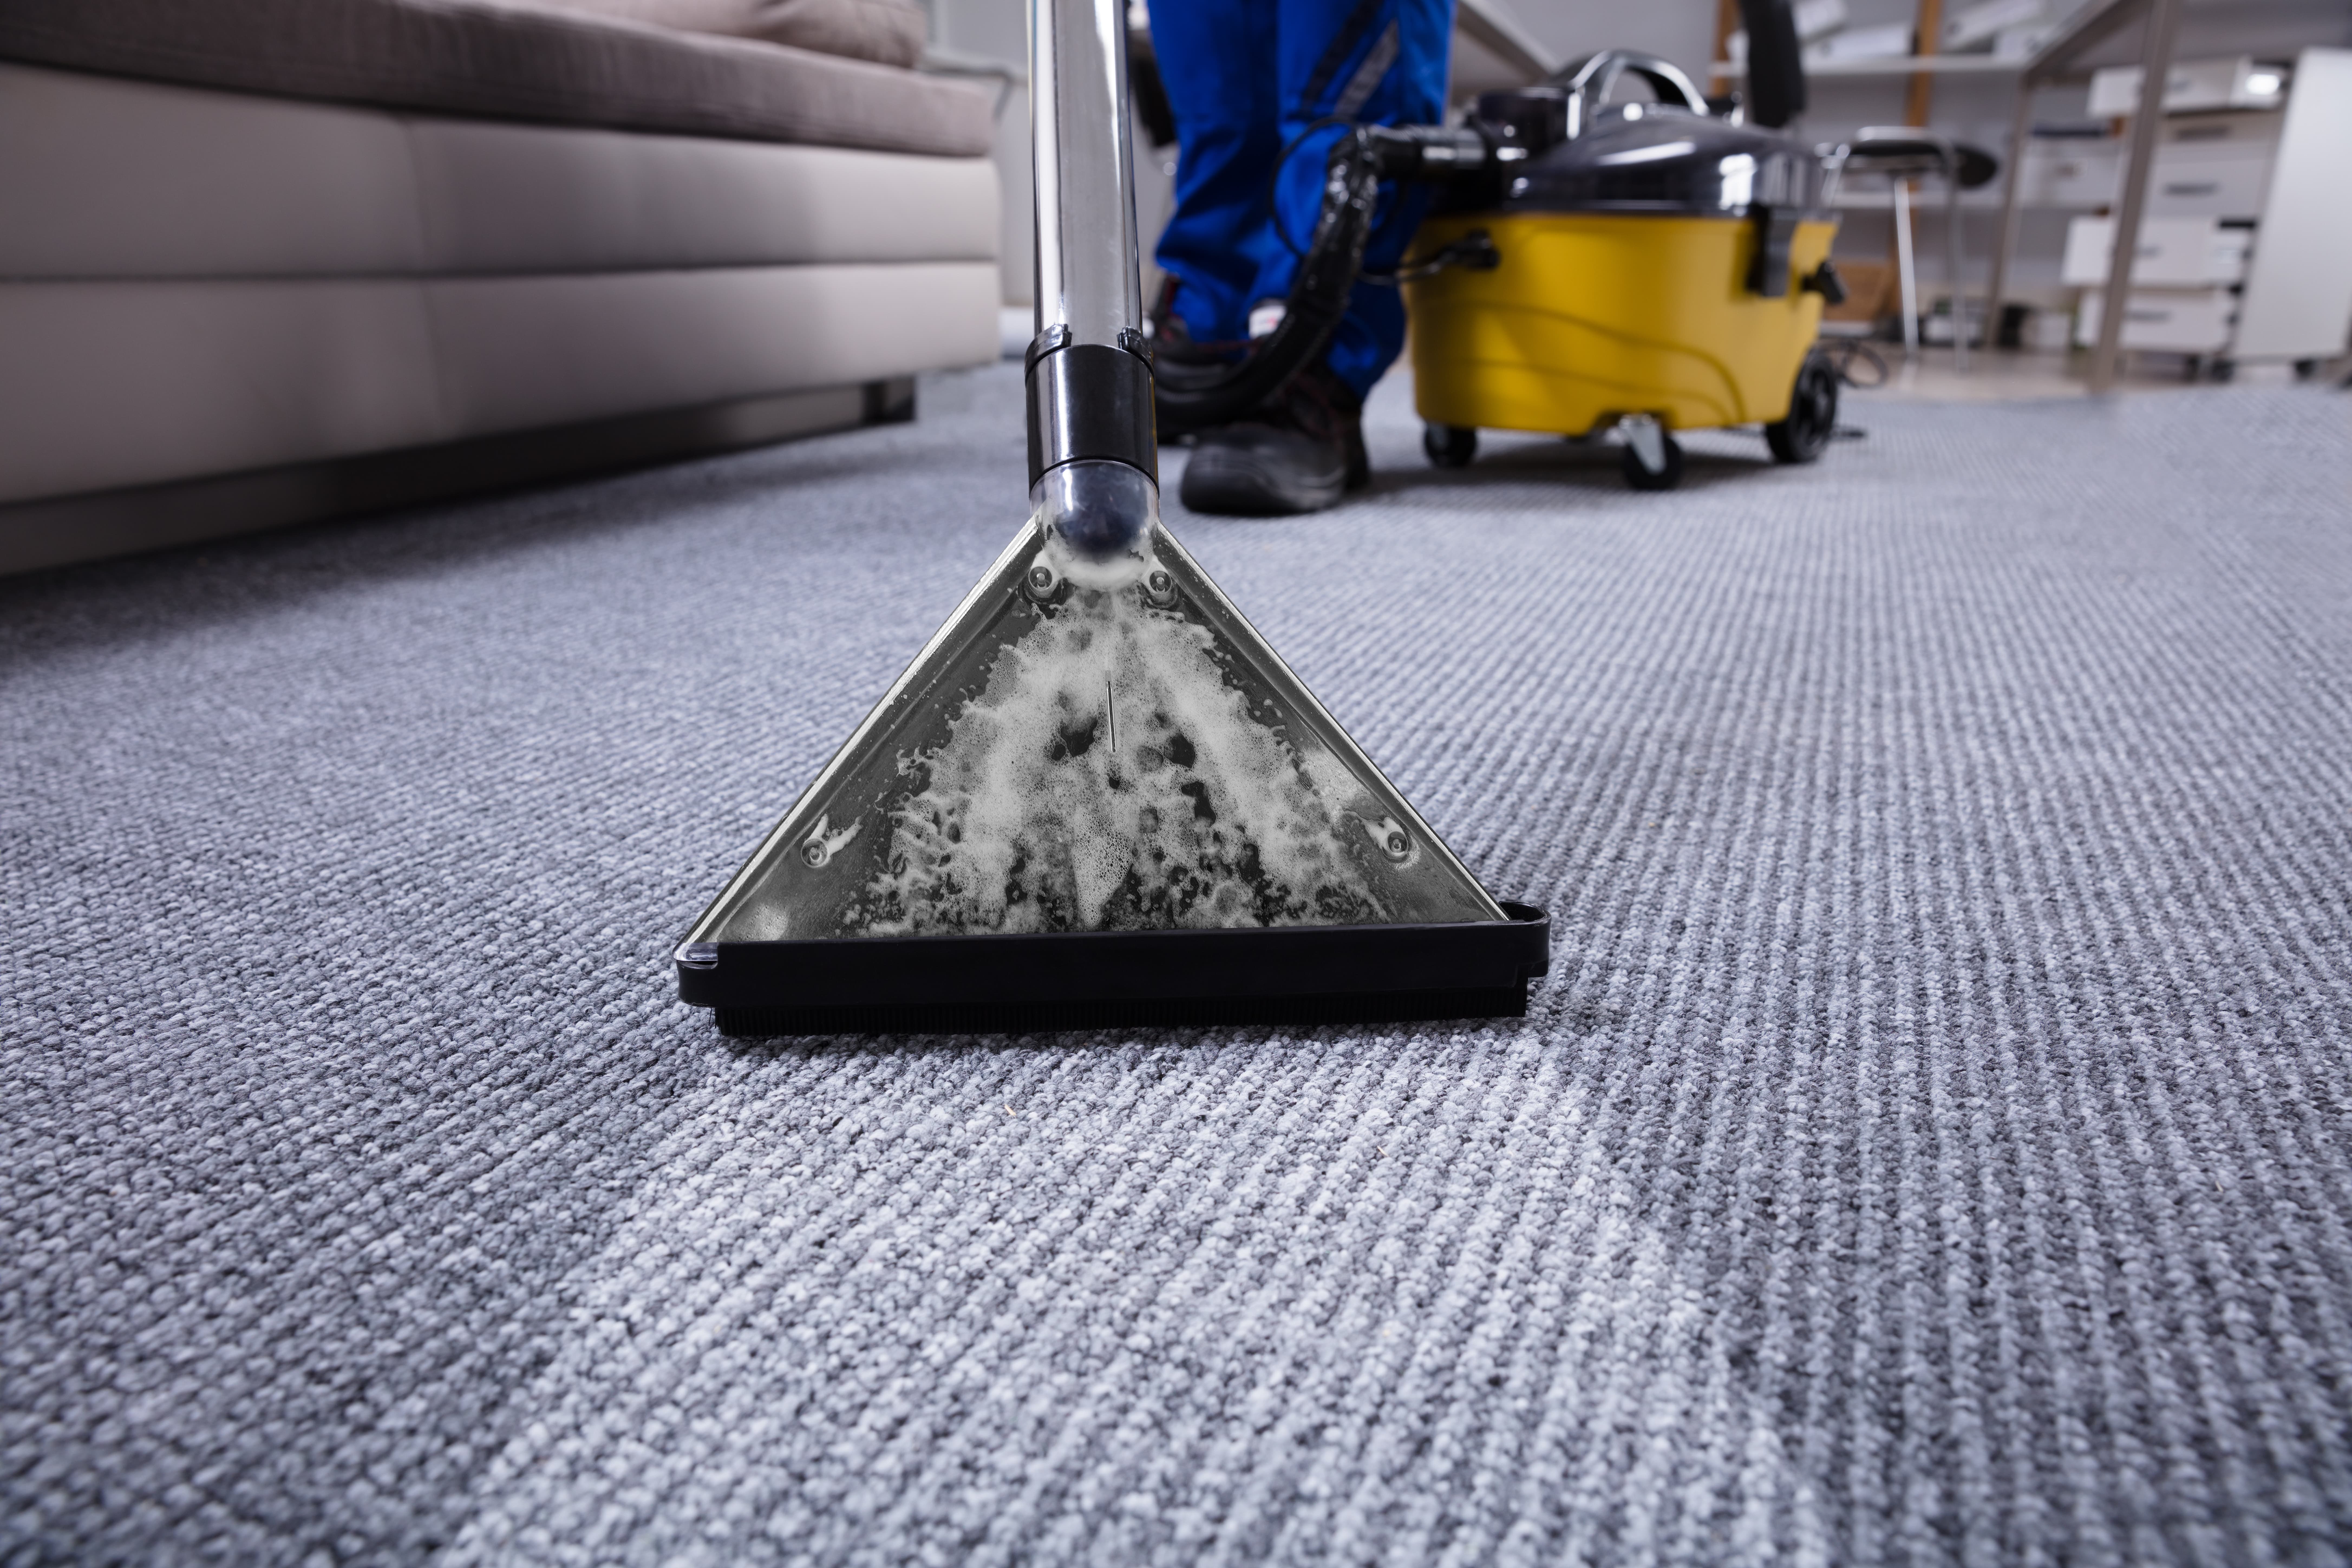 Carpet being cleaned by cleaner, using a cleaning tool.